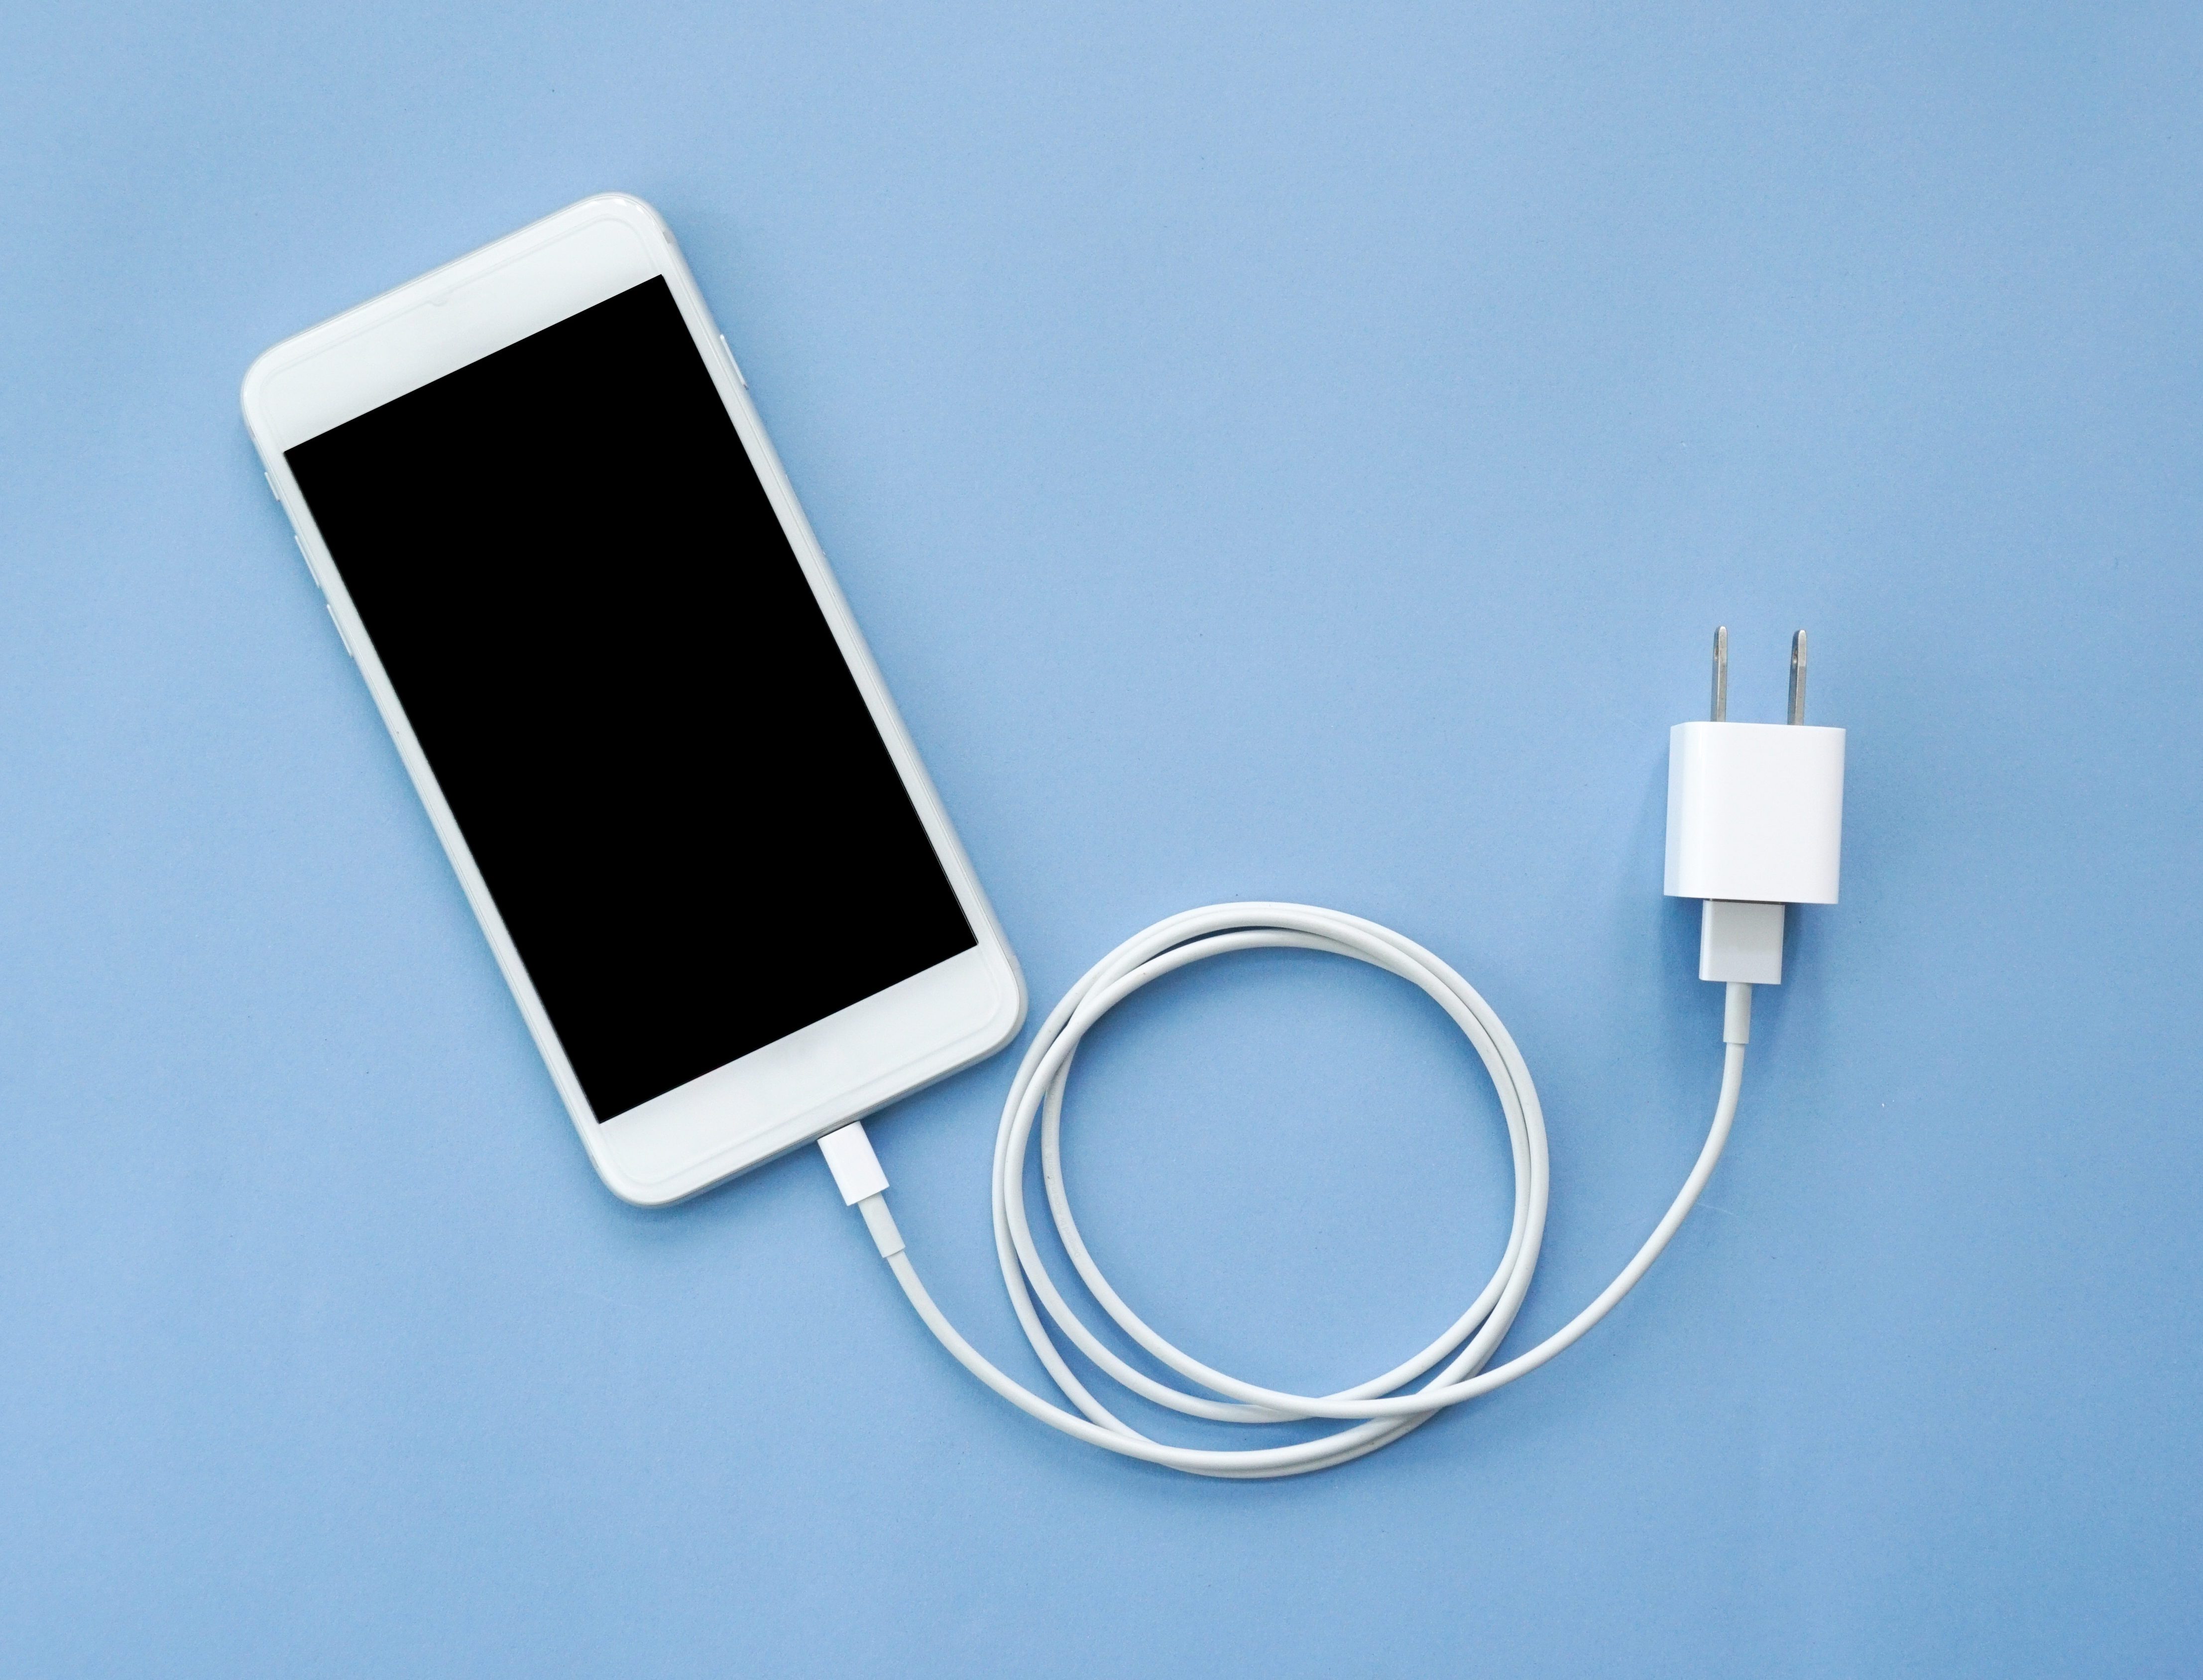 Smartphone Plug In with Charger Adapter on Blue Background Top View